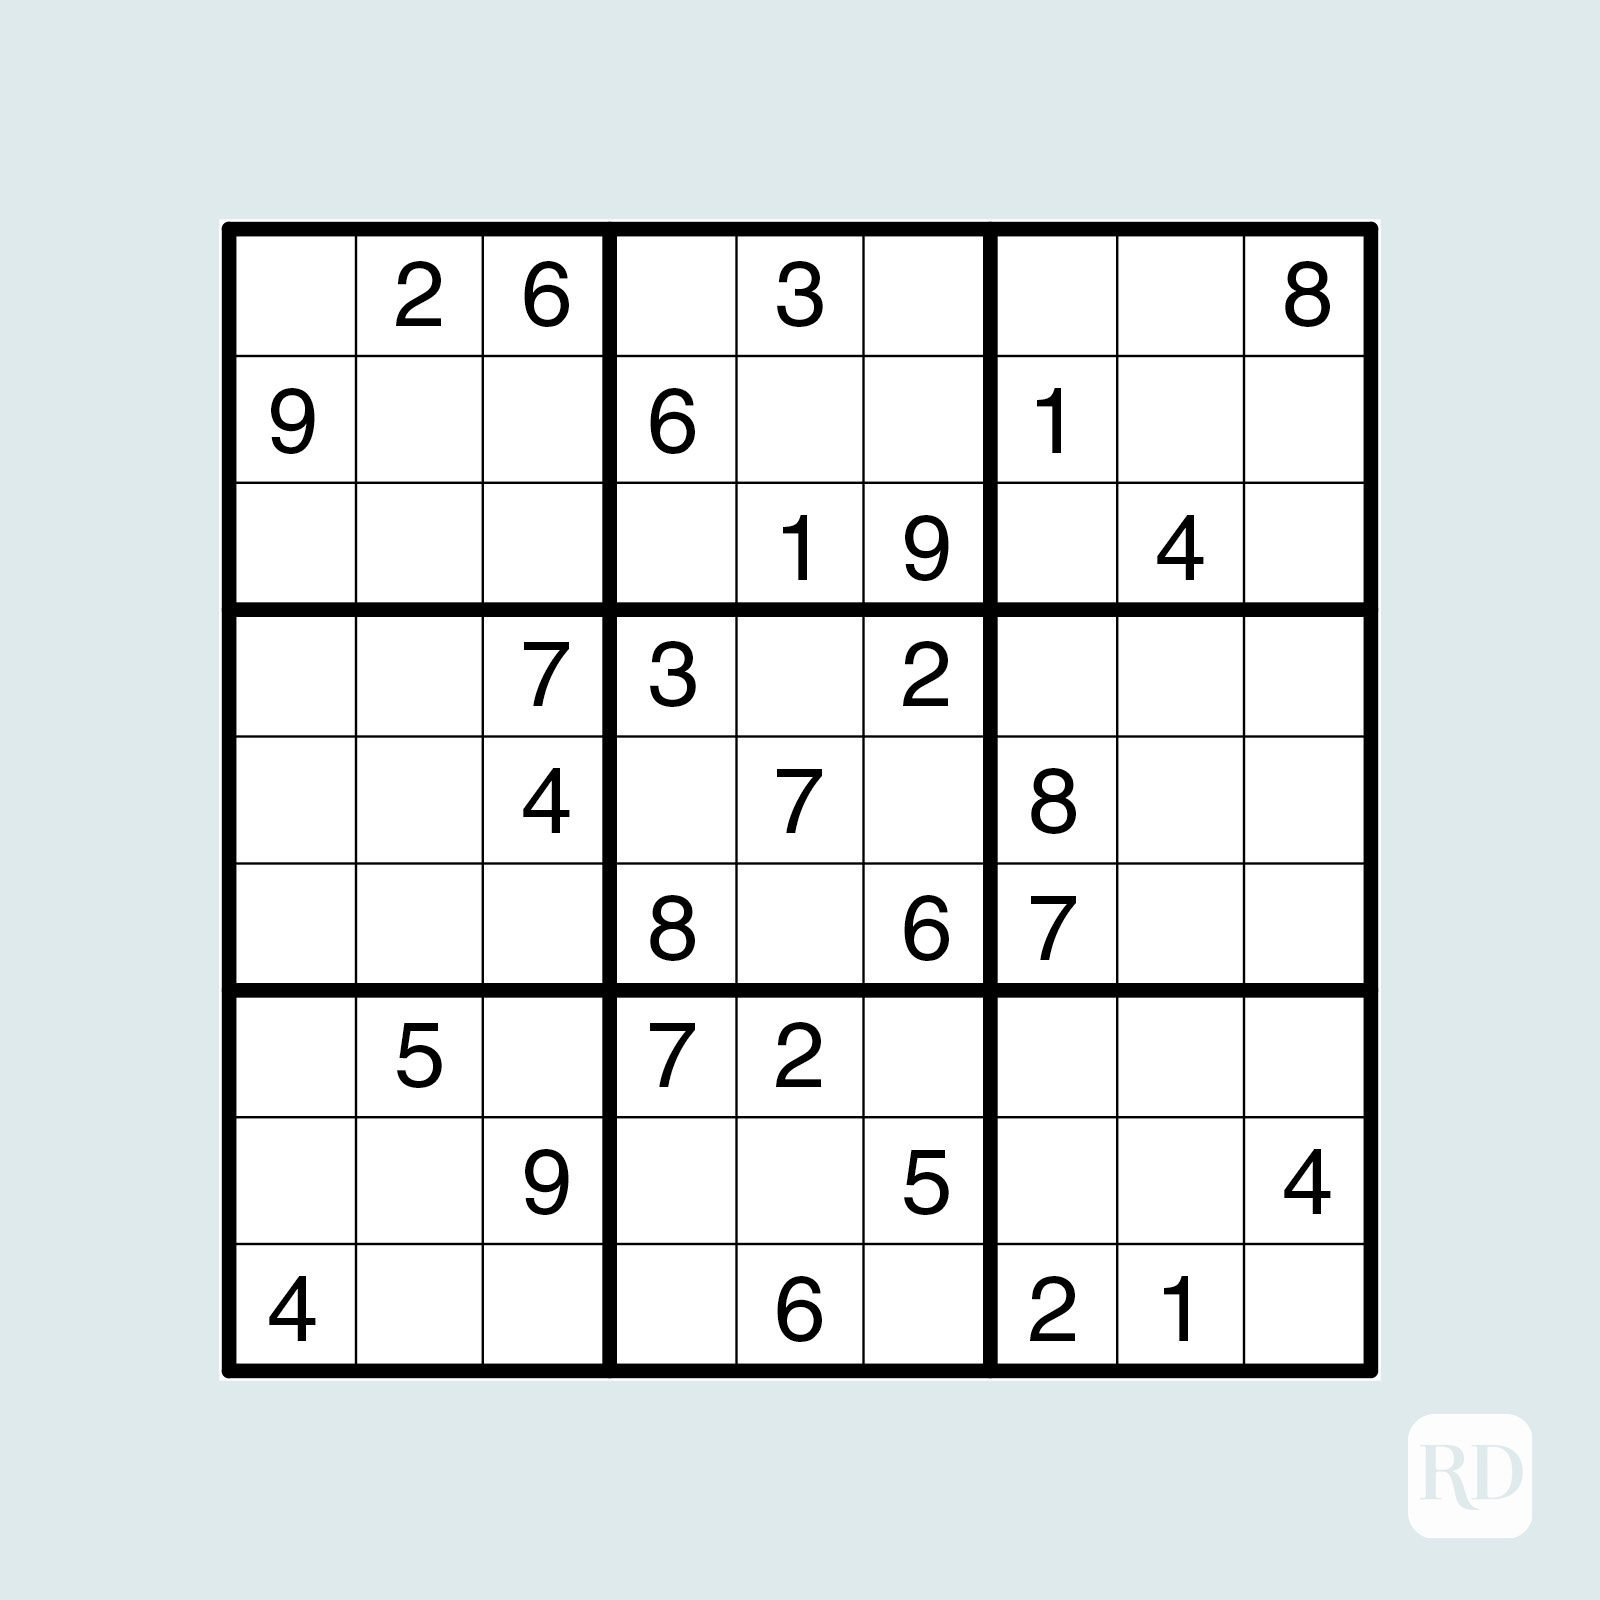 20 Free Printable Sudoku Puzzles for All Levels Reader #39 s Digest